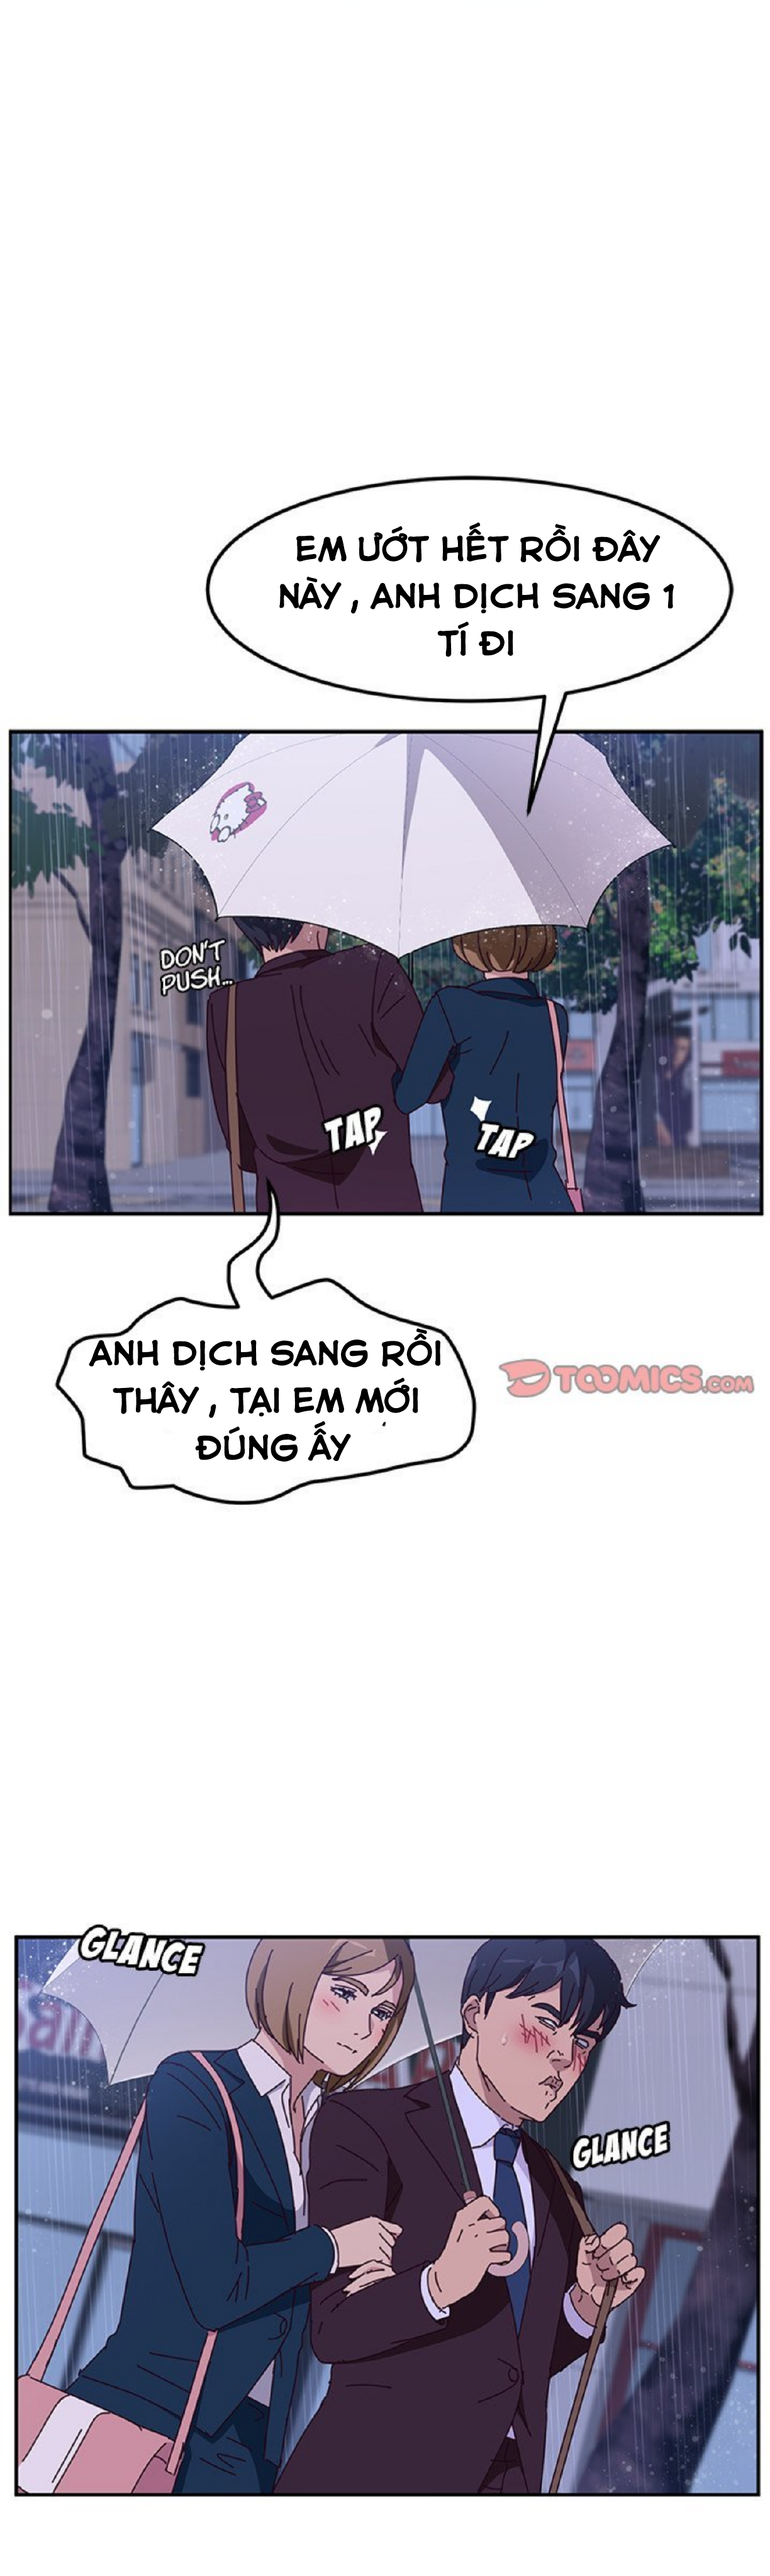 Chapter 006 : Chapter 06 ảnh 15